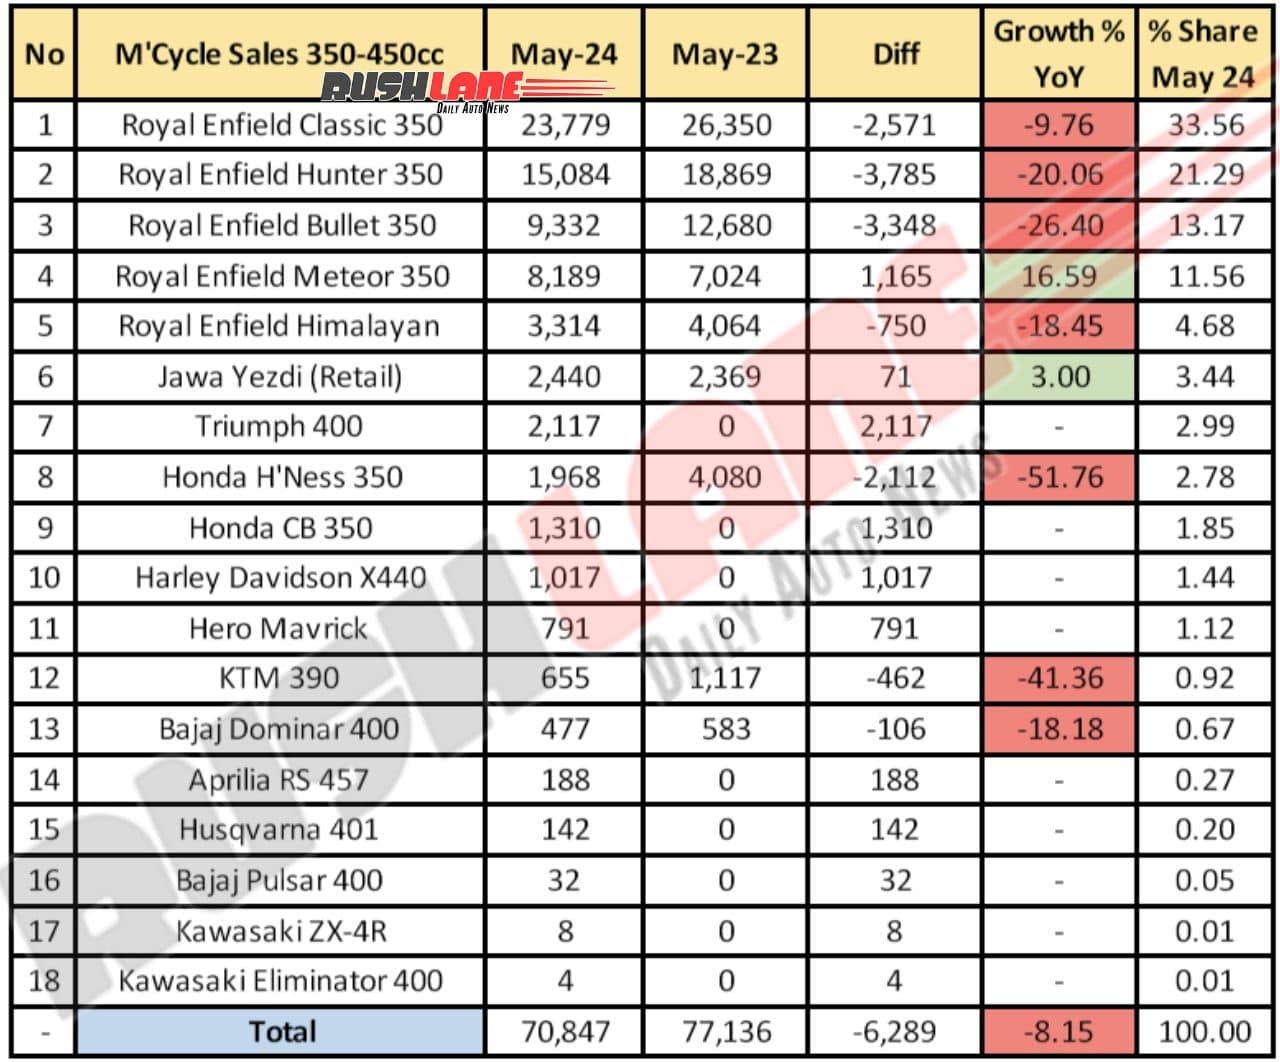 350cc To 450cc Motorcycle Sales May 2024 - YoY